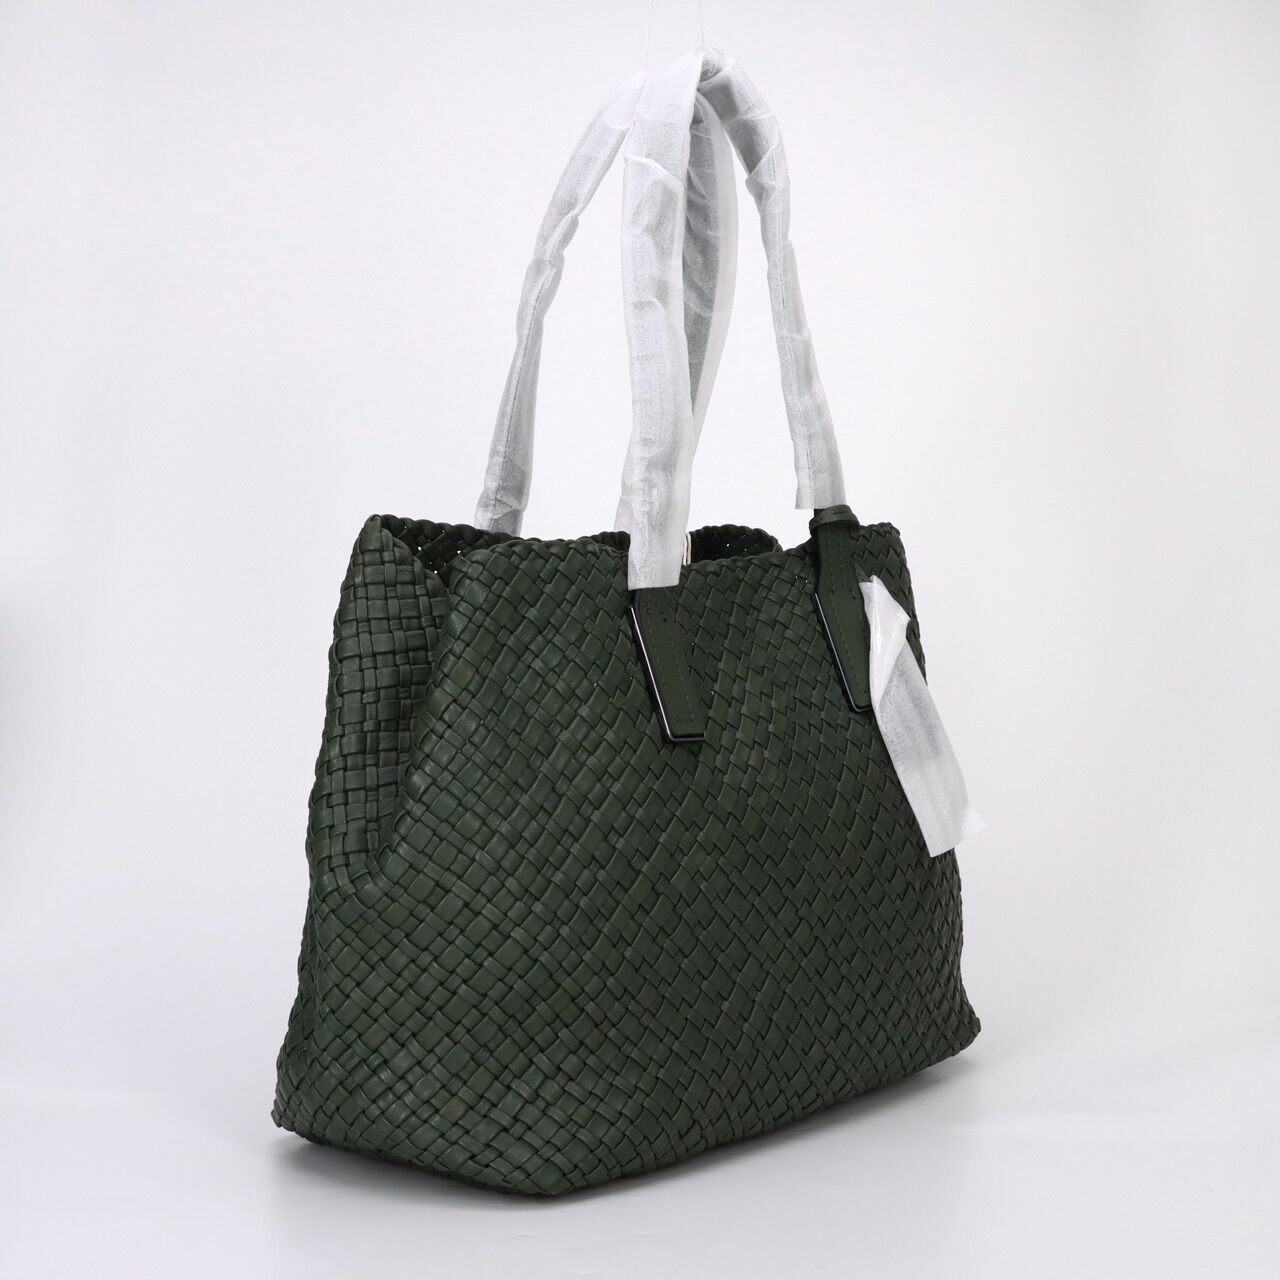 Etienne Aigner Irene Woven Leather Tote Pine Green